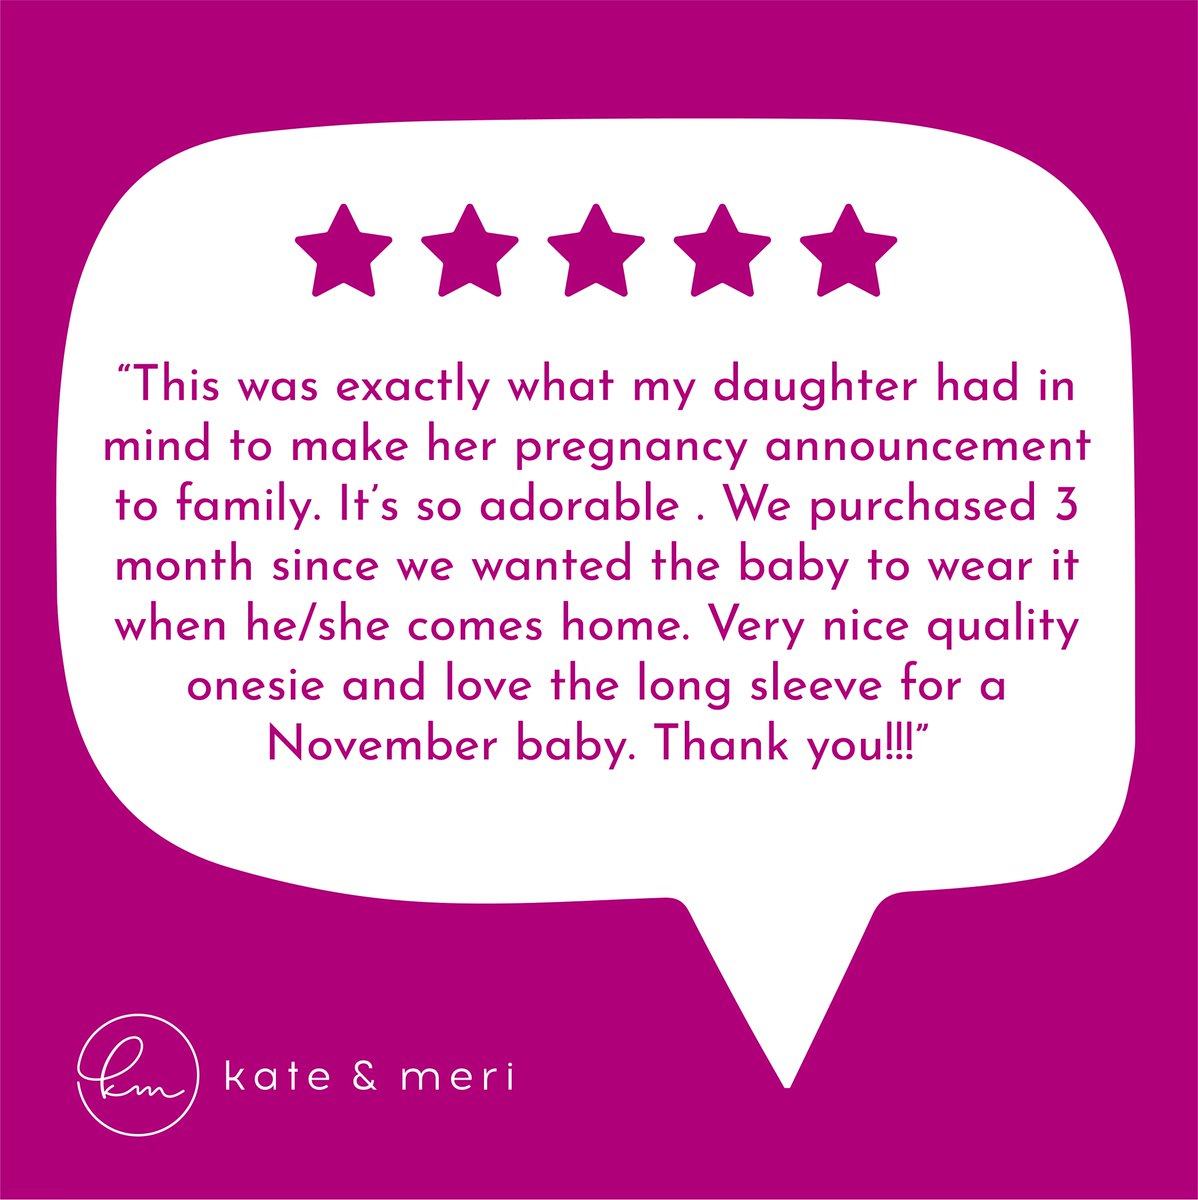 'This was exactly what my daughter had in mind to make her pregnancy announcement to family. It's so adorable. We purchased 3 month since we wanted the baby to wear it when he/she comes home. Very nice quality onesie! Thank you!!!' - Jasmine

#customonesie #customgift #babygift